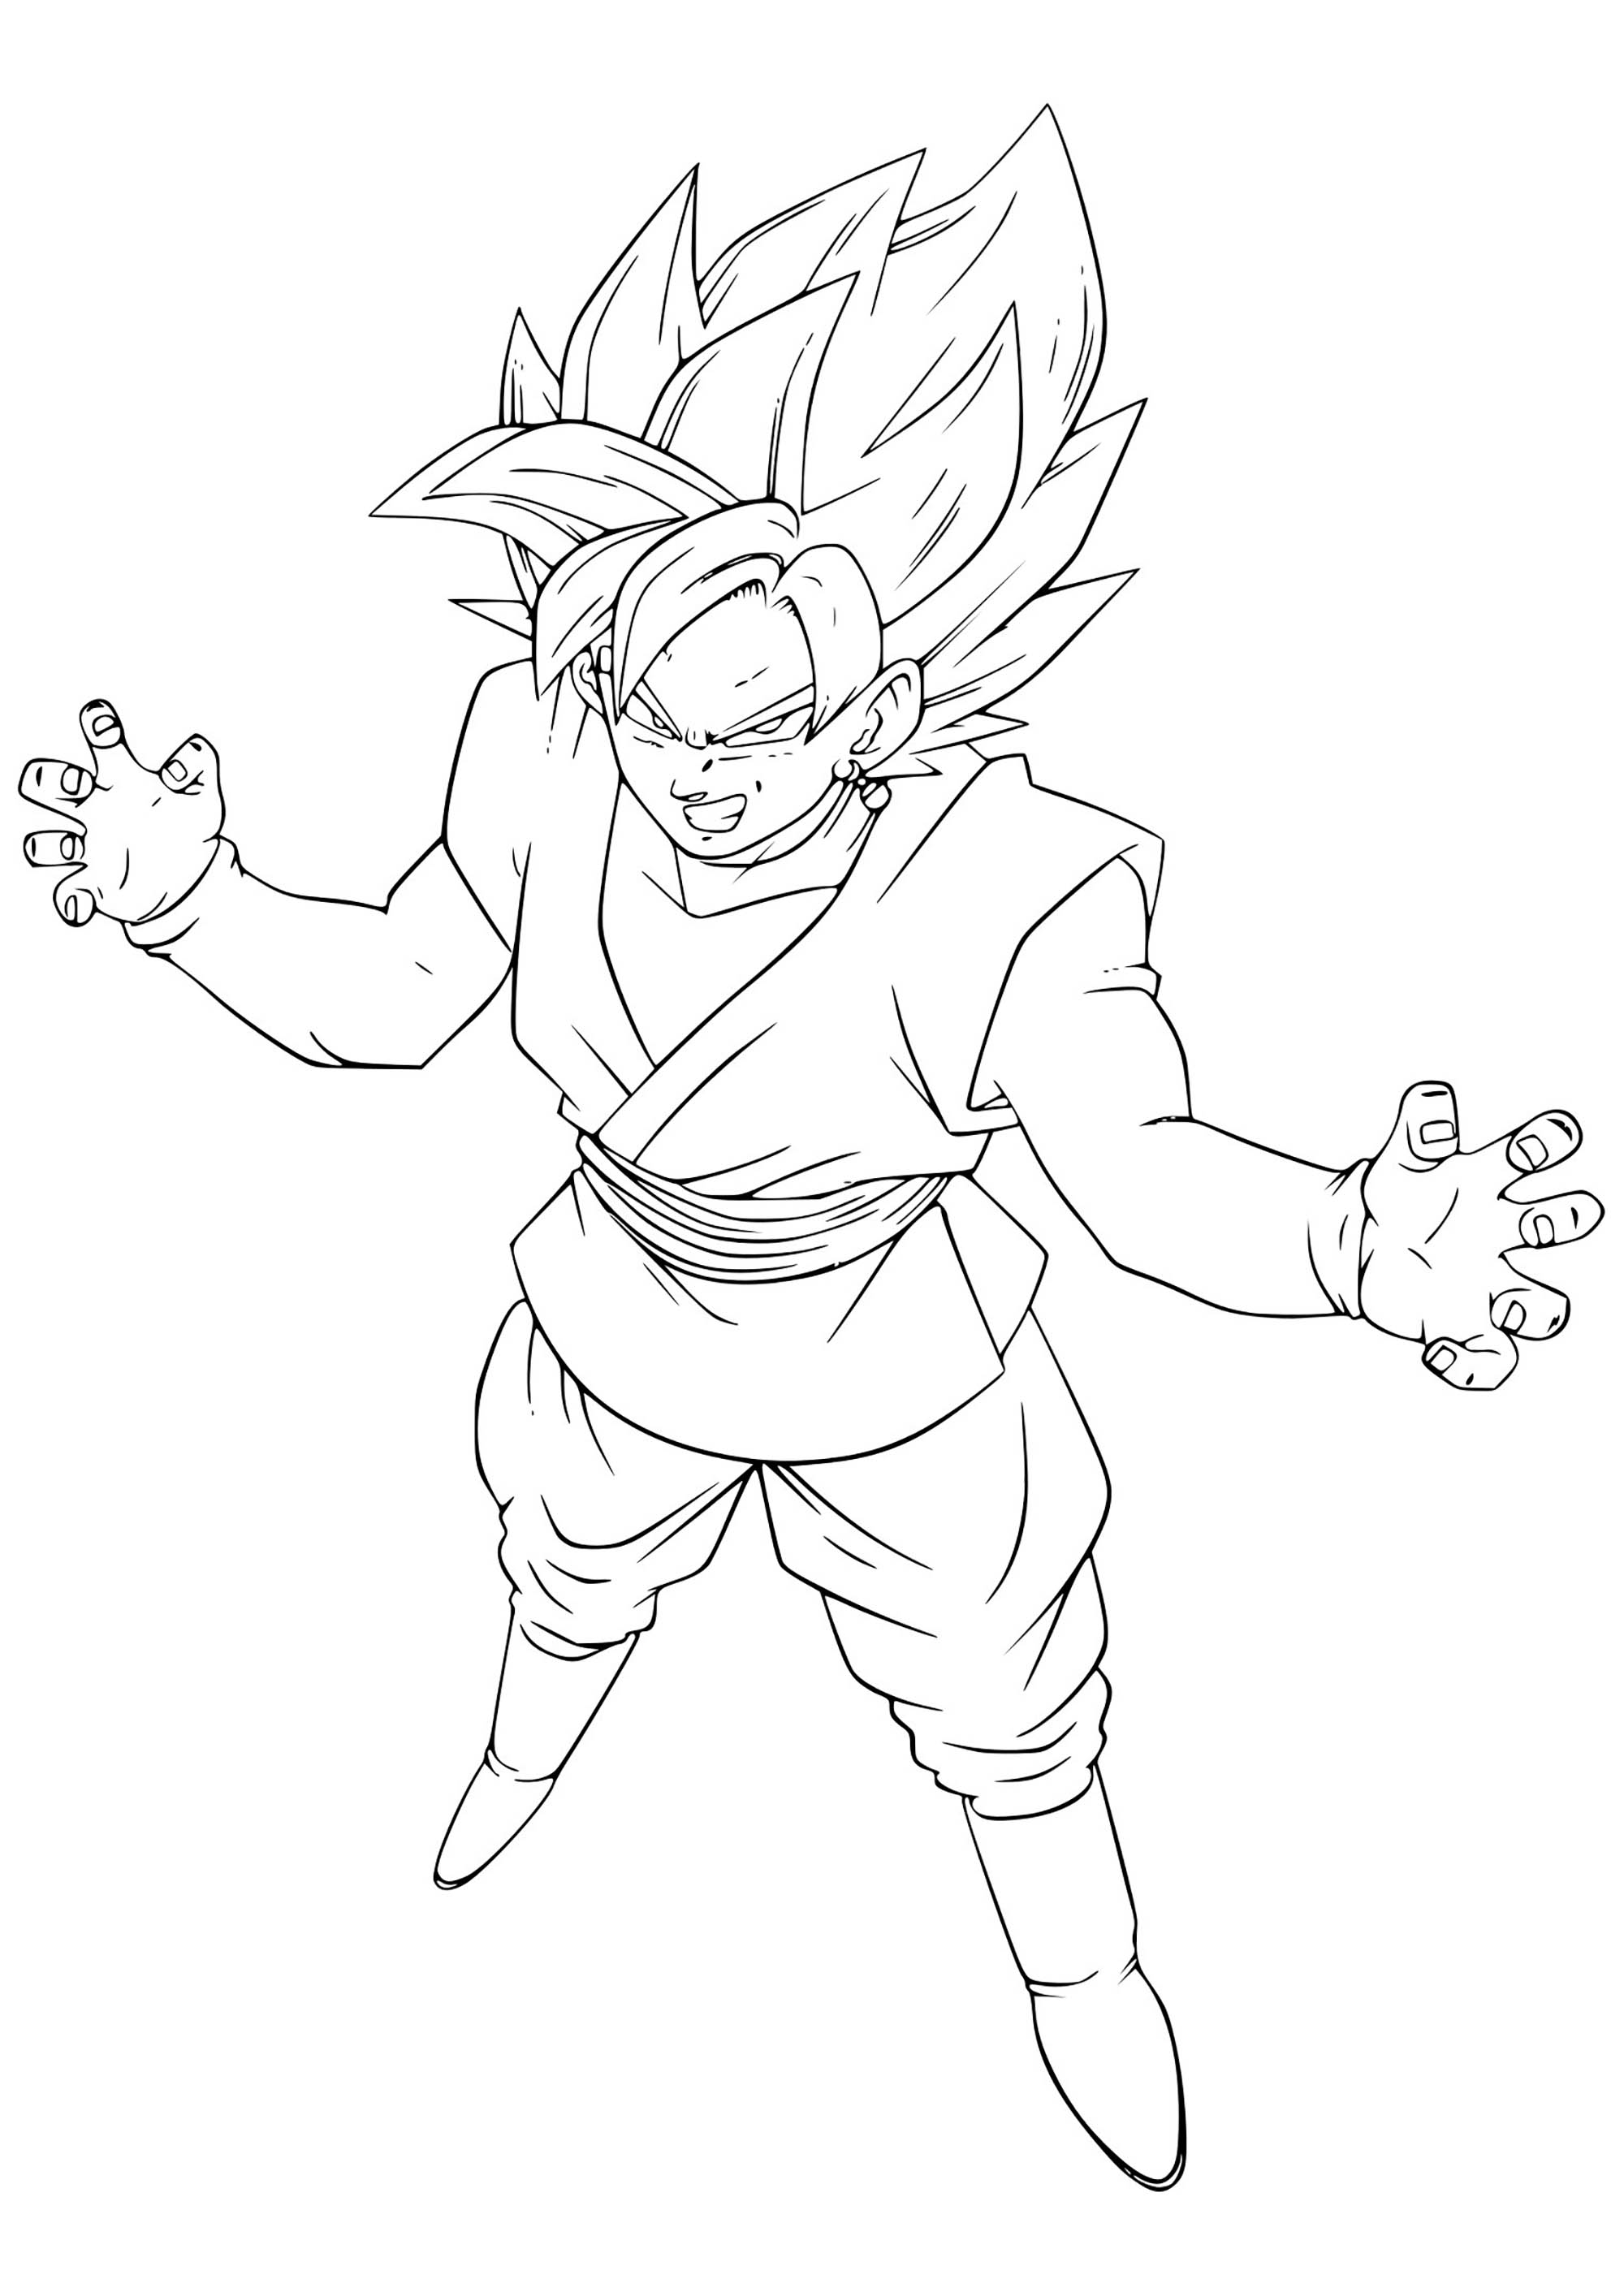 892 Cute Dragon Ball Z Goku Coloring Pages Printable for Kids